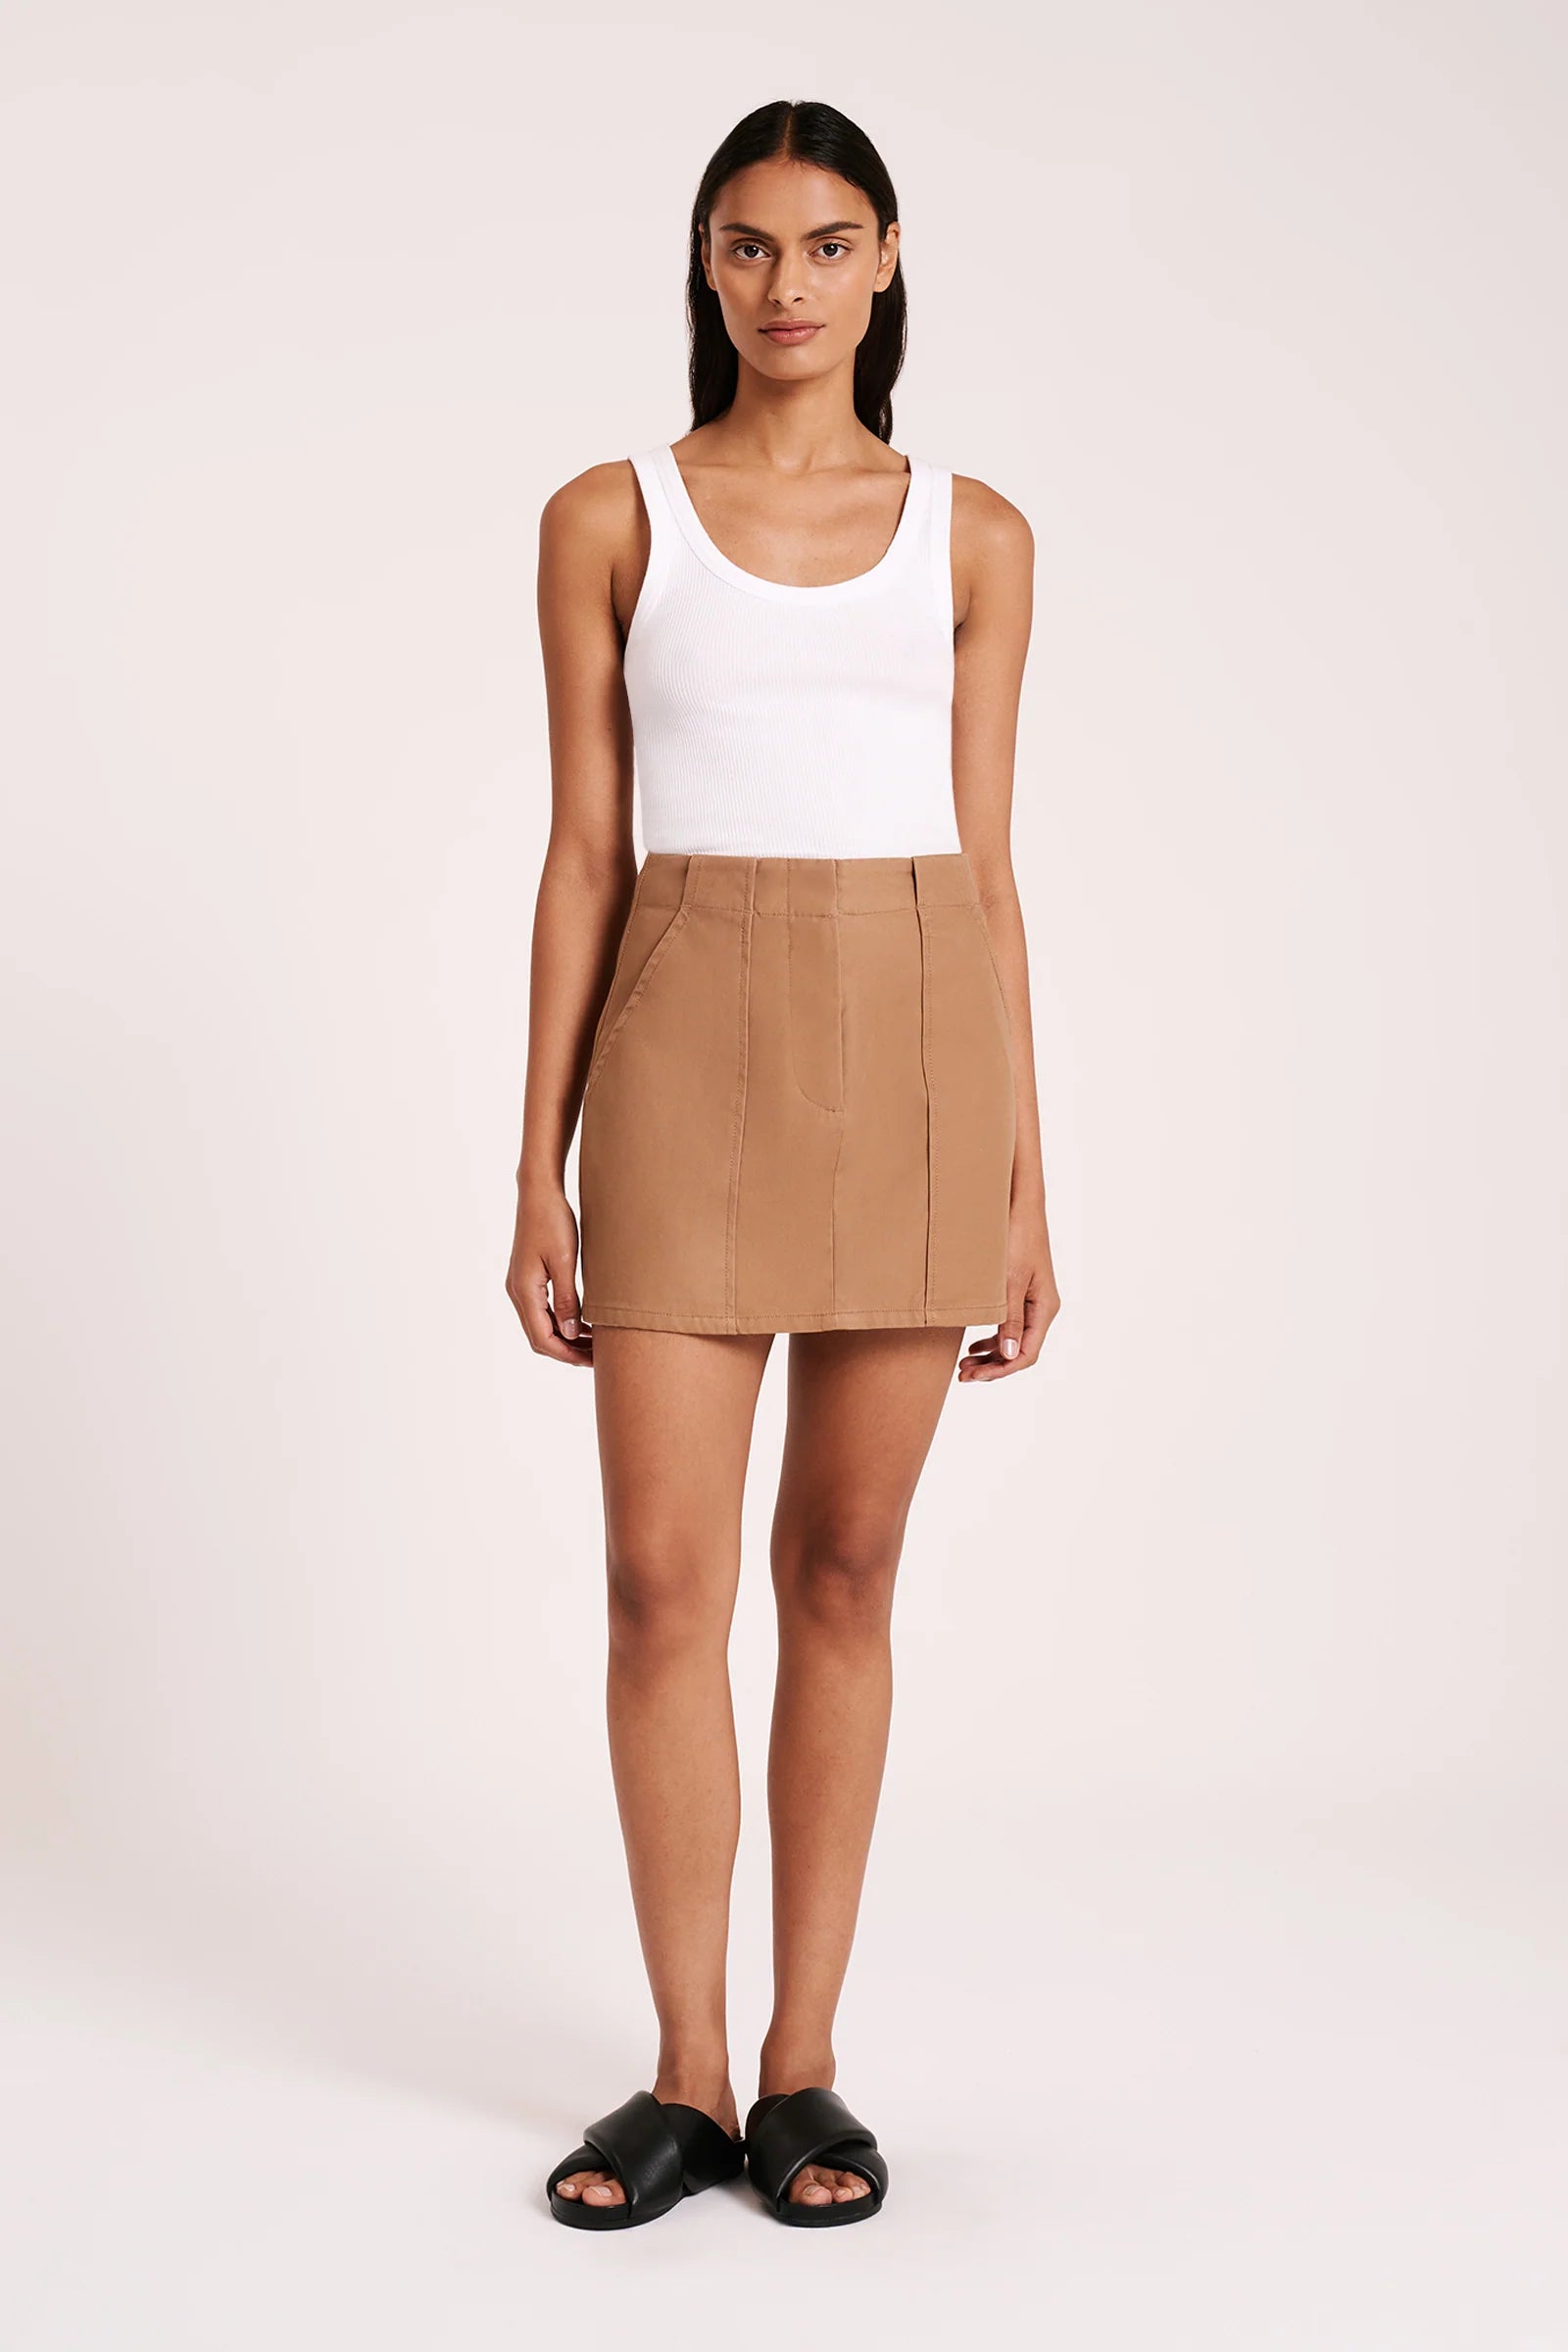 Nude Lucy | Brisa Skirt - Sepia